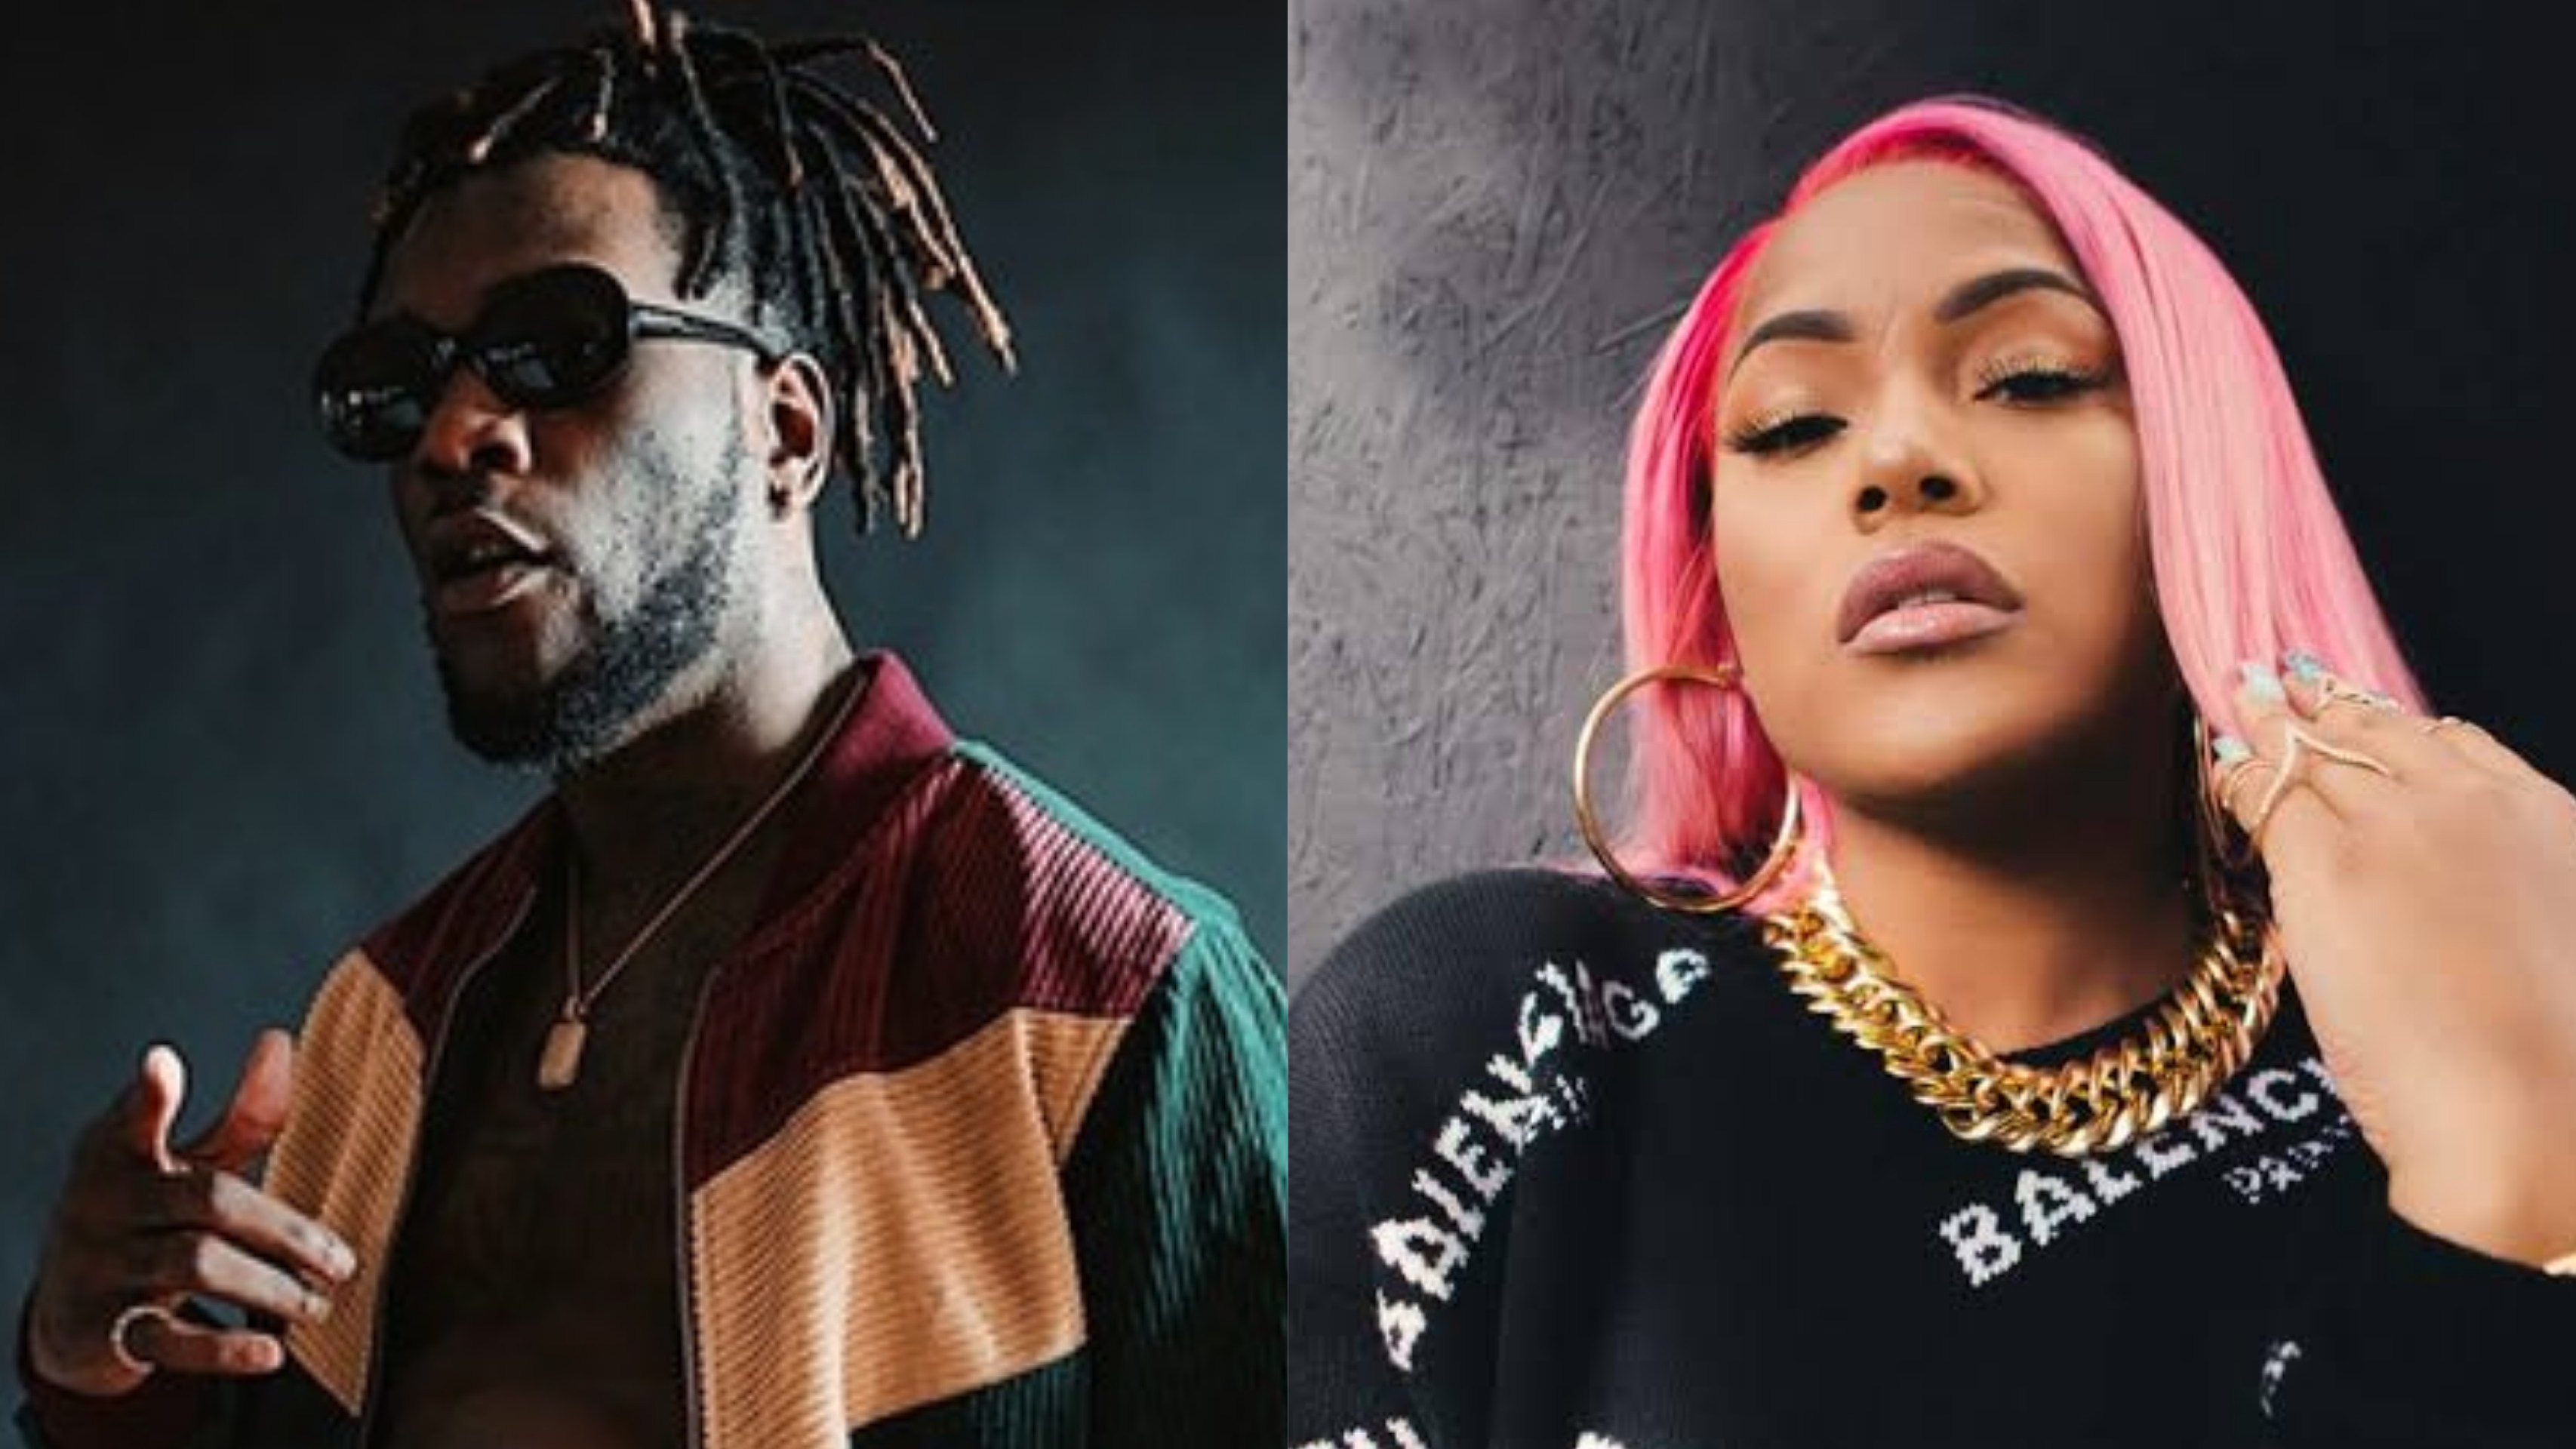 Burna Boy Reveals His Plans To Have Babies With His Rapper Girlfriend Stefflon Don